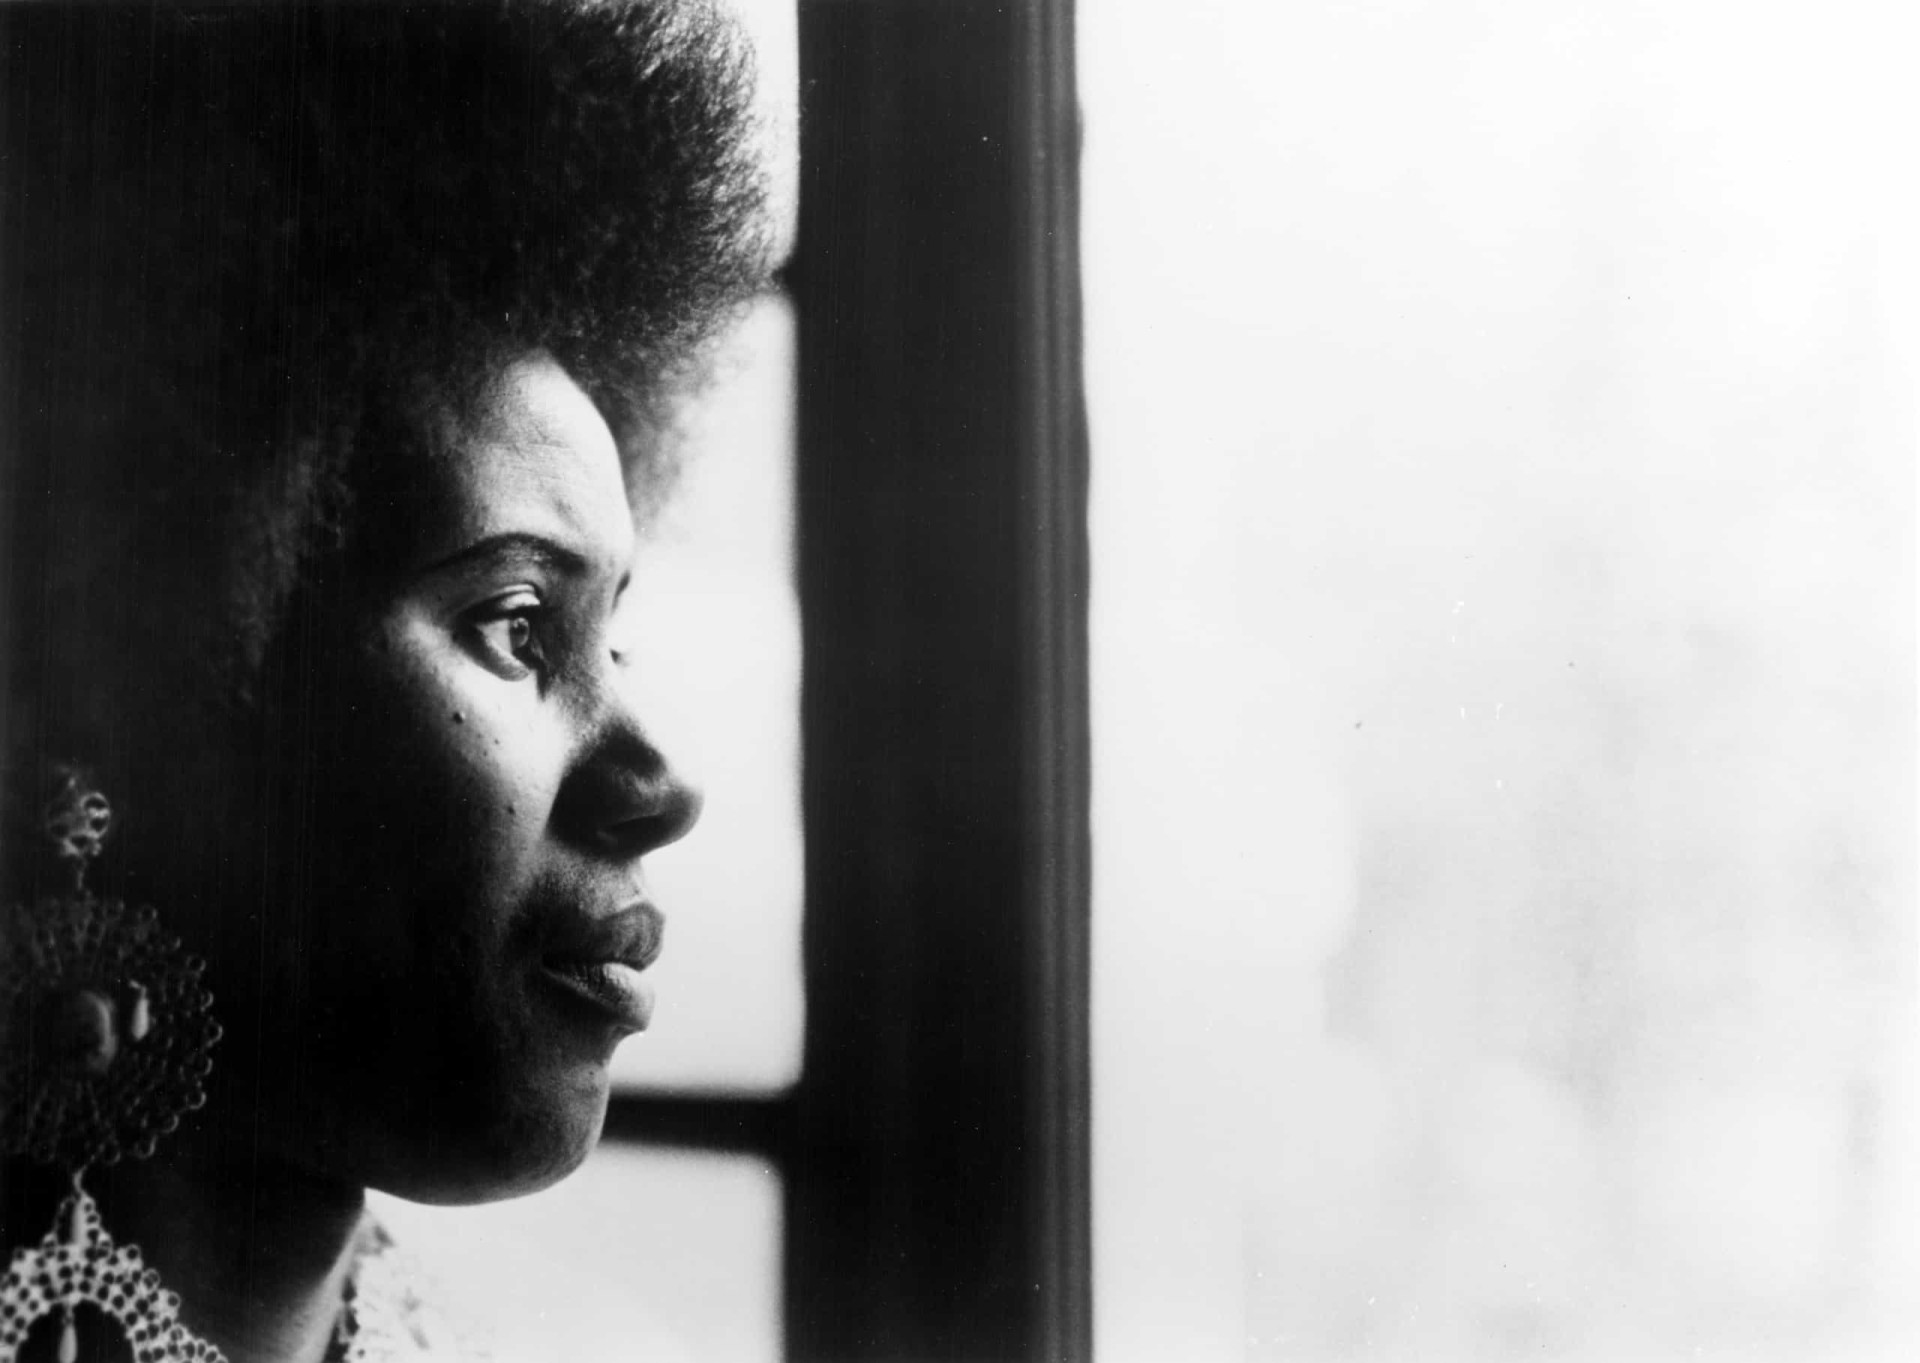 <p>The wife of John Coltrane, Alice Coltrane had no need to live in her husband's shadow. She led a long and illustrious career as a jazz composer, and is largely responsible for introducing the harp to the genre. Coltrane's career was also marked by her lifelong mission to combine music and spirituality in a way never attempted before.</p><p>You may also like:<a href="https://www.starsinsider.com/n/188995?utm_source=msn.com&utm_medium=display&utm_campaign=referral_description&utm_content=507986v1en-sg"> Superfoods that could change your life</a></p>